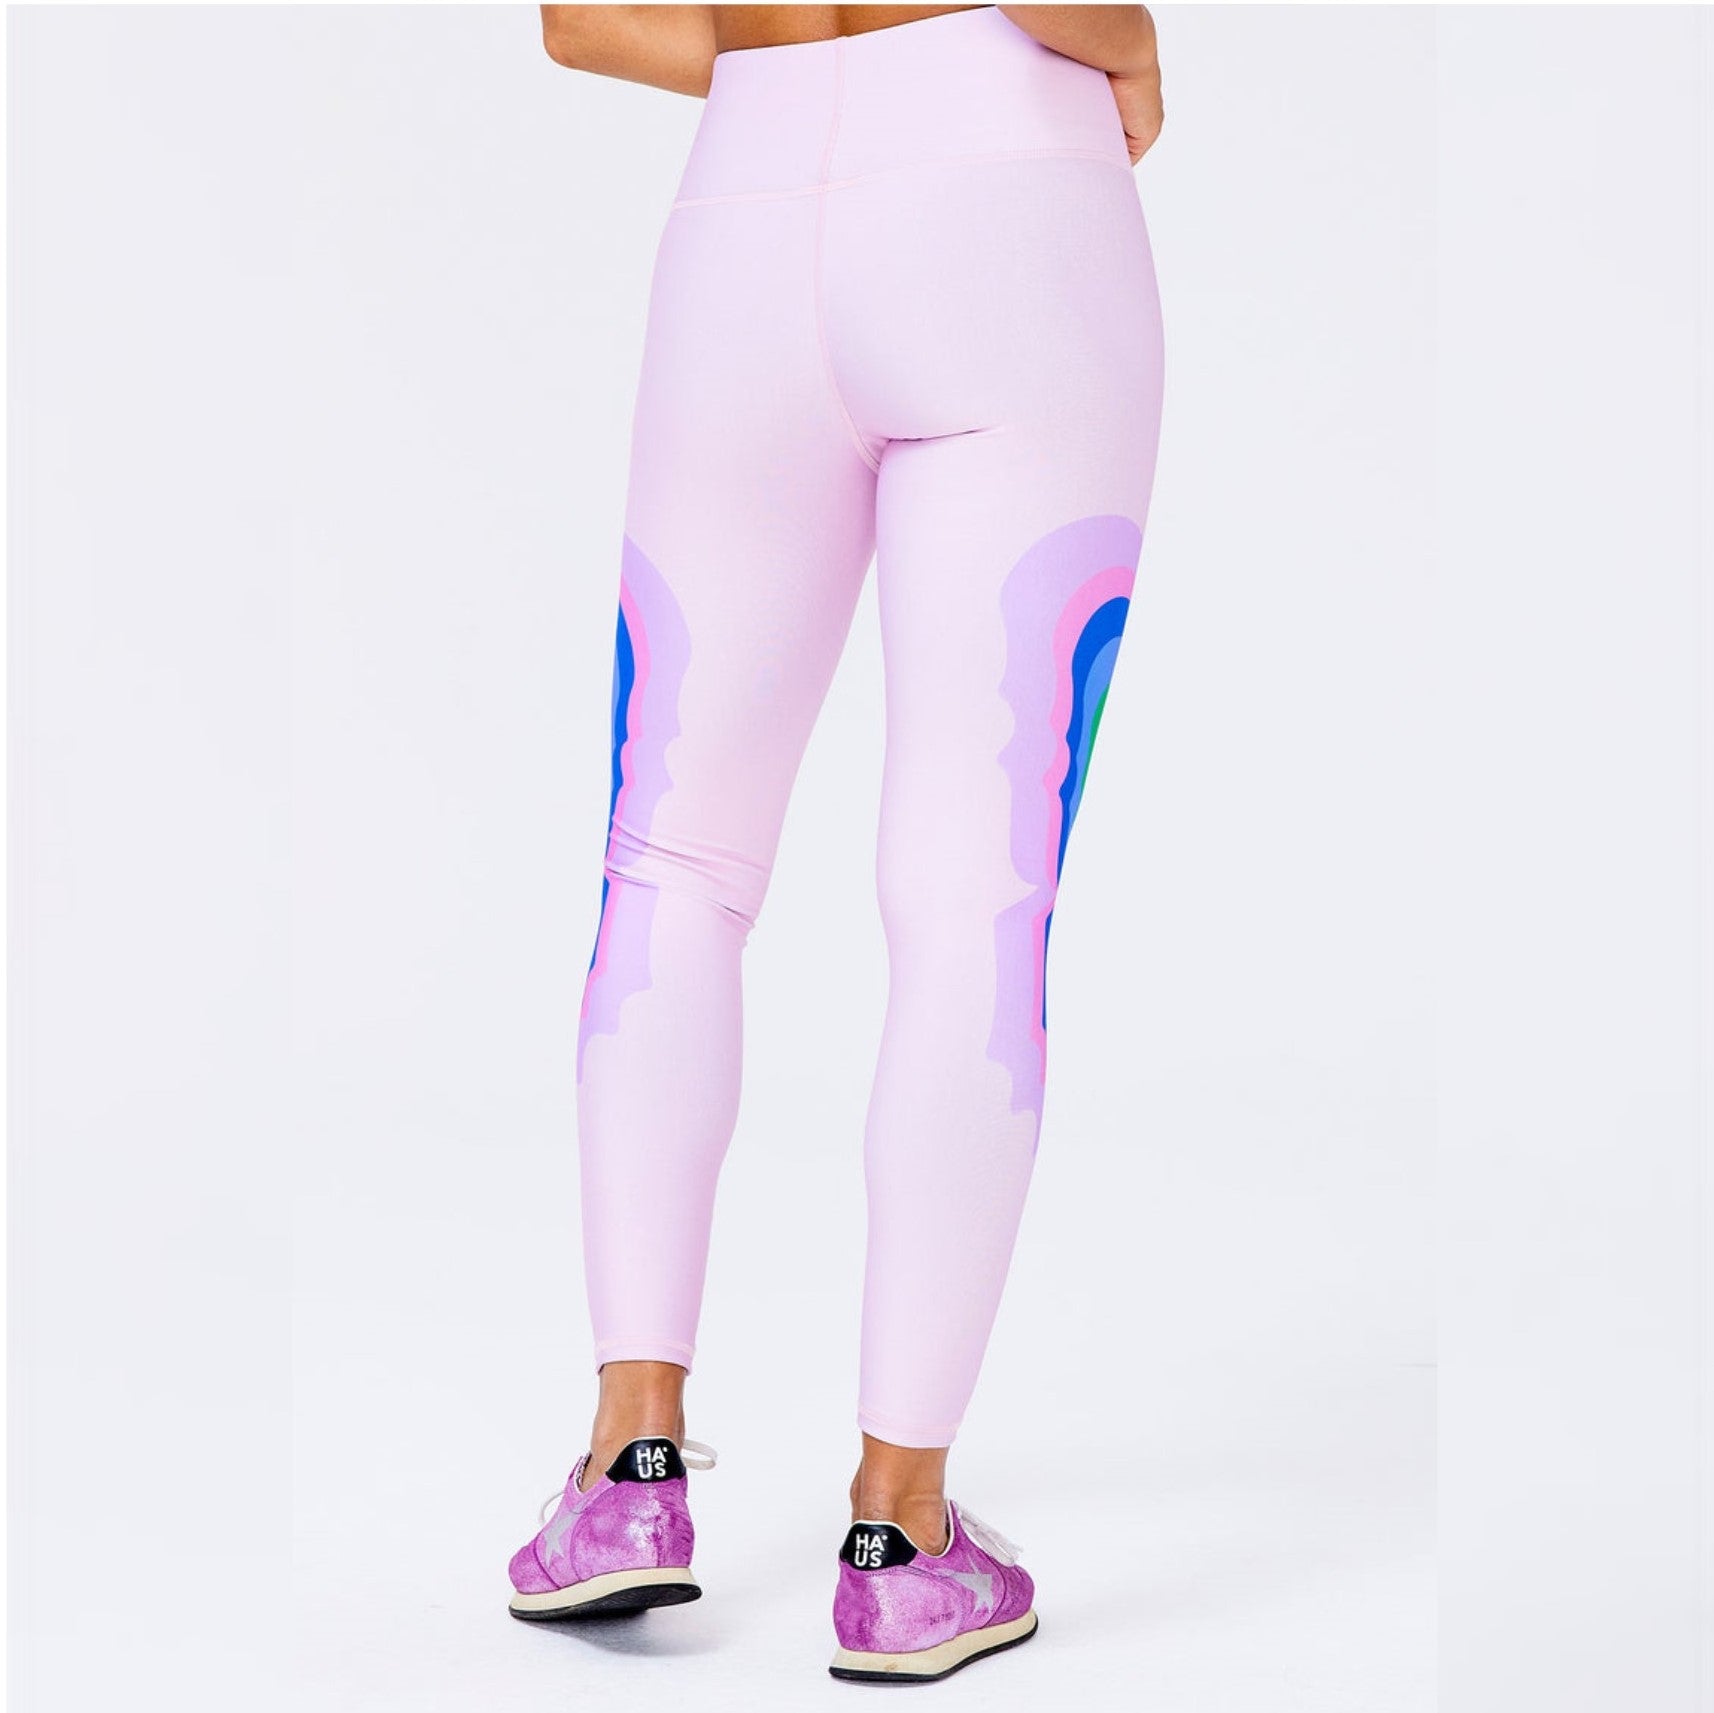 Psychedelic Butterfly Duoknit Leggings - Terez - simplyWORKOUT